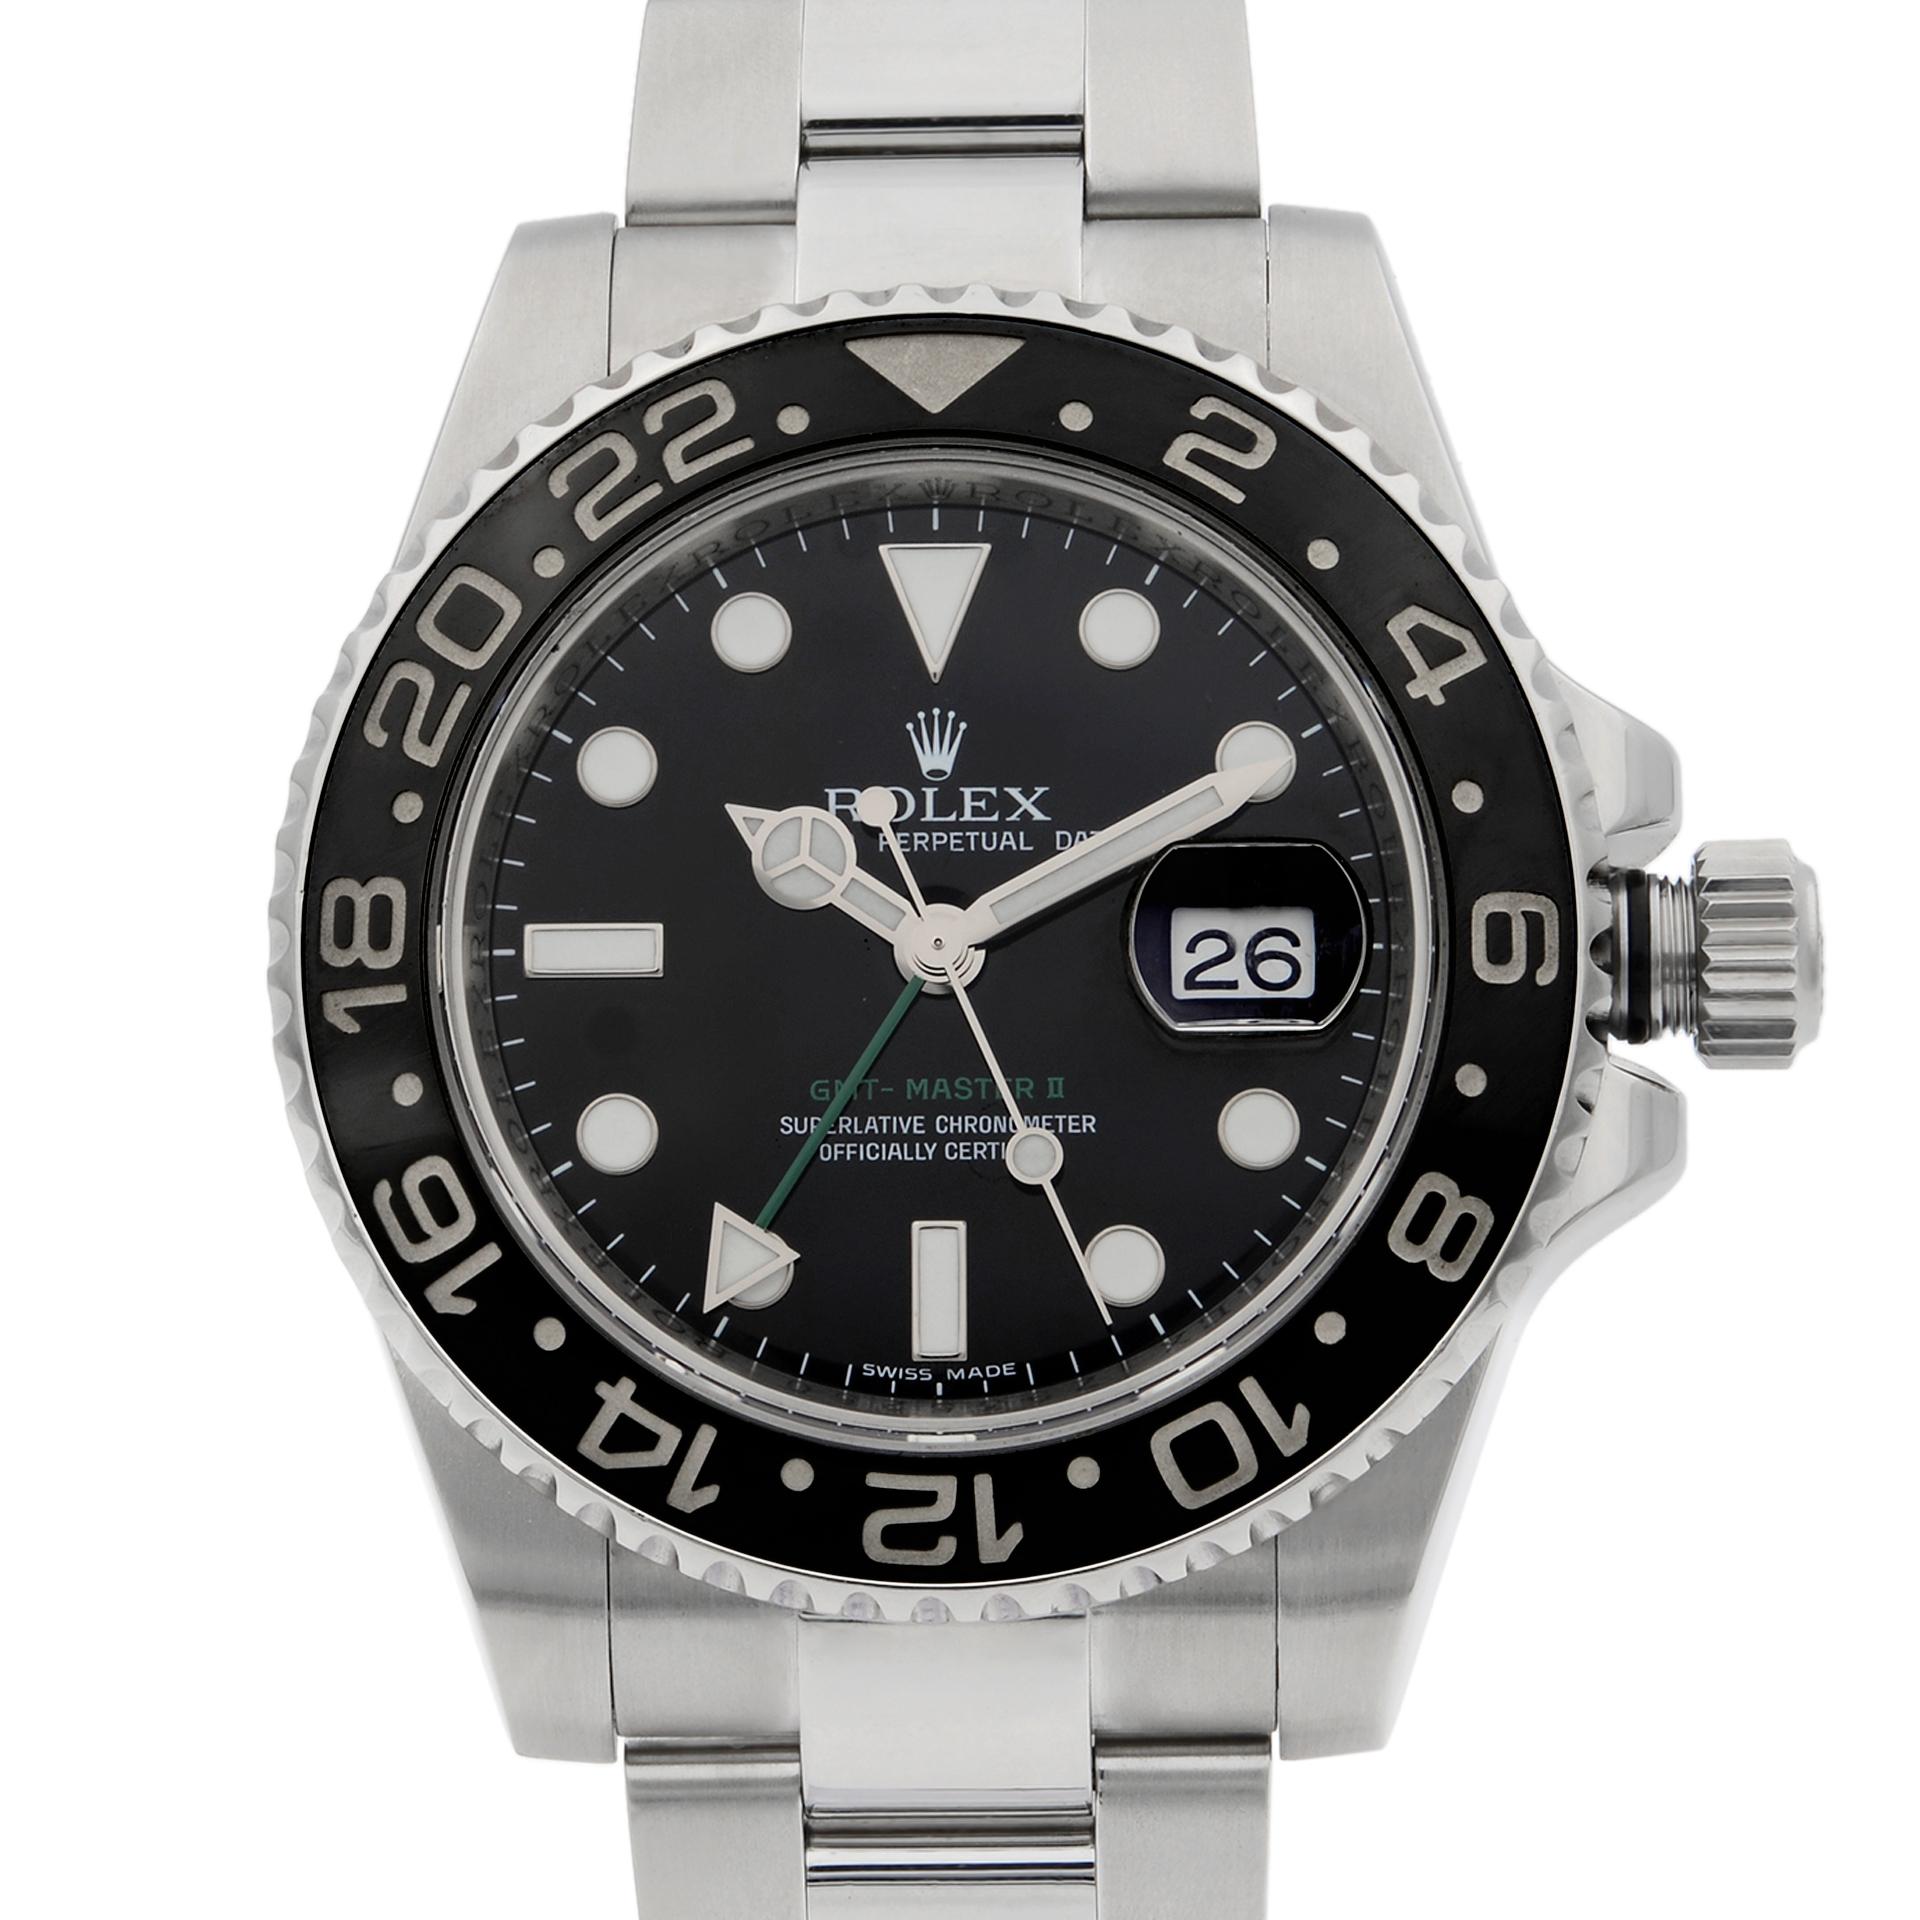 This pre-owned Rolex GMT-Master II 116710N is a beautiful men's timepiece that is powered by a mechanical (automatic) movement which is cased in a stainless steel case. It has a round shape face, GMT, date indicator dial, and has hand sticks & dots